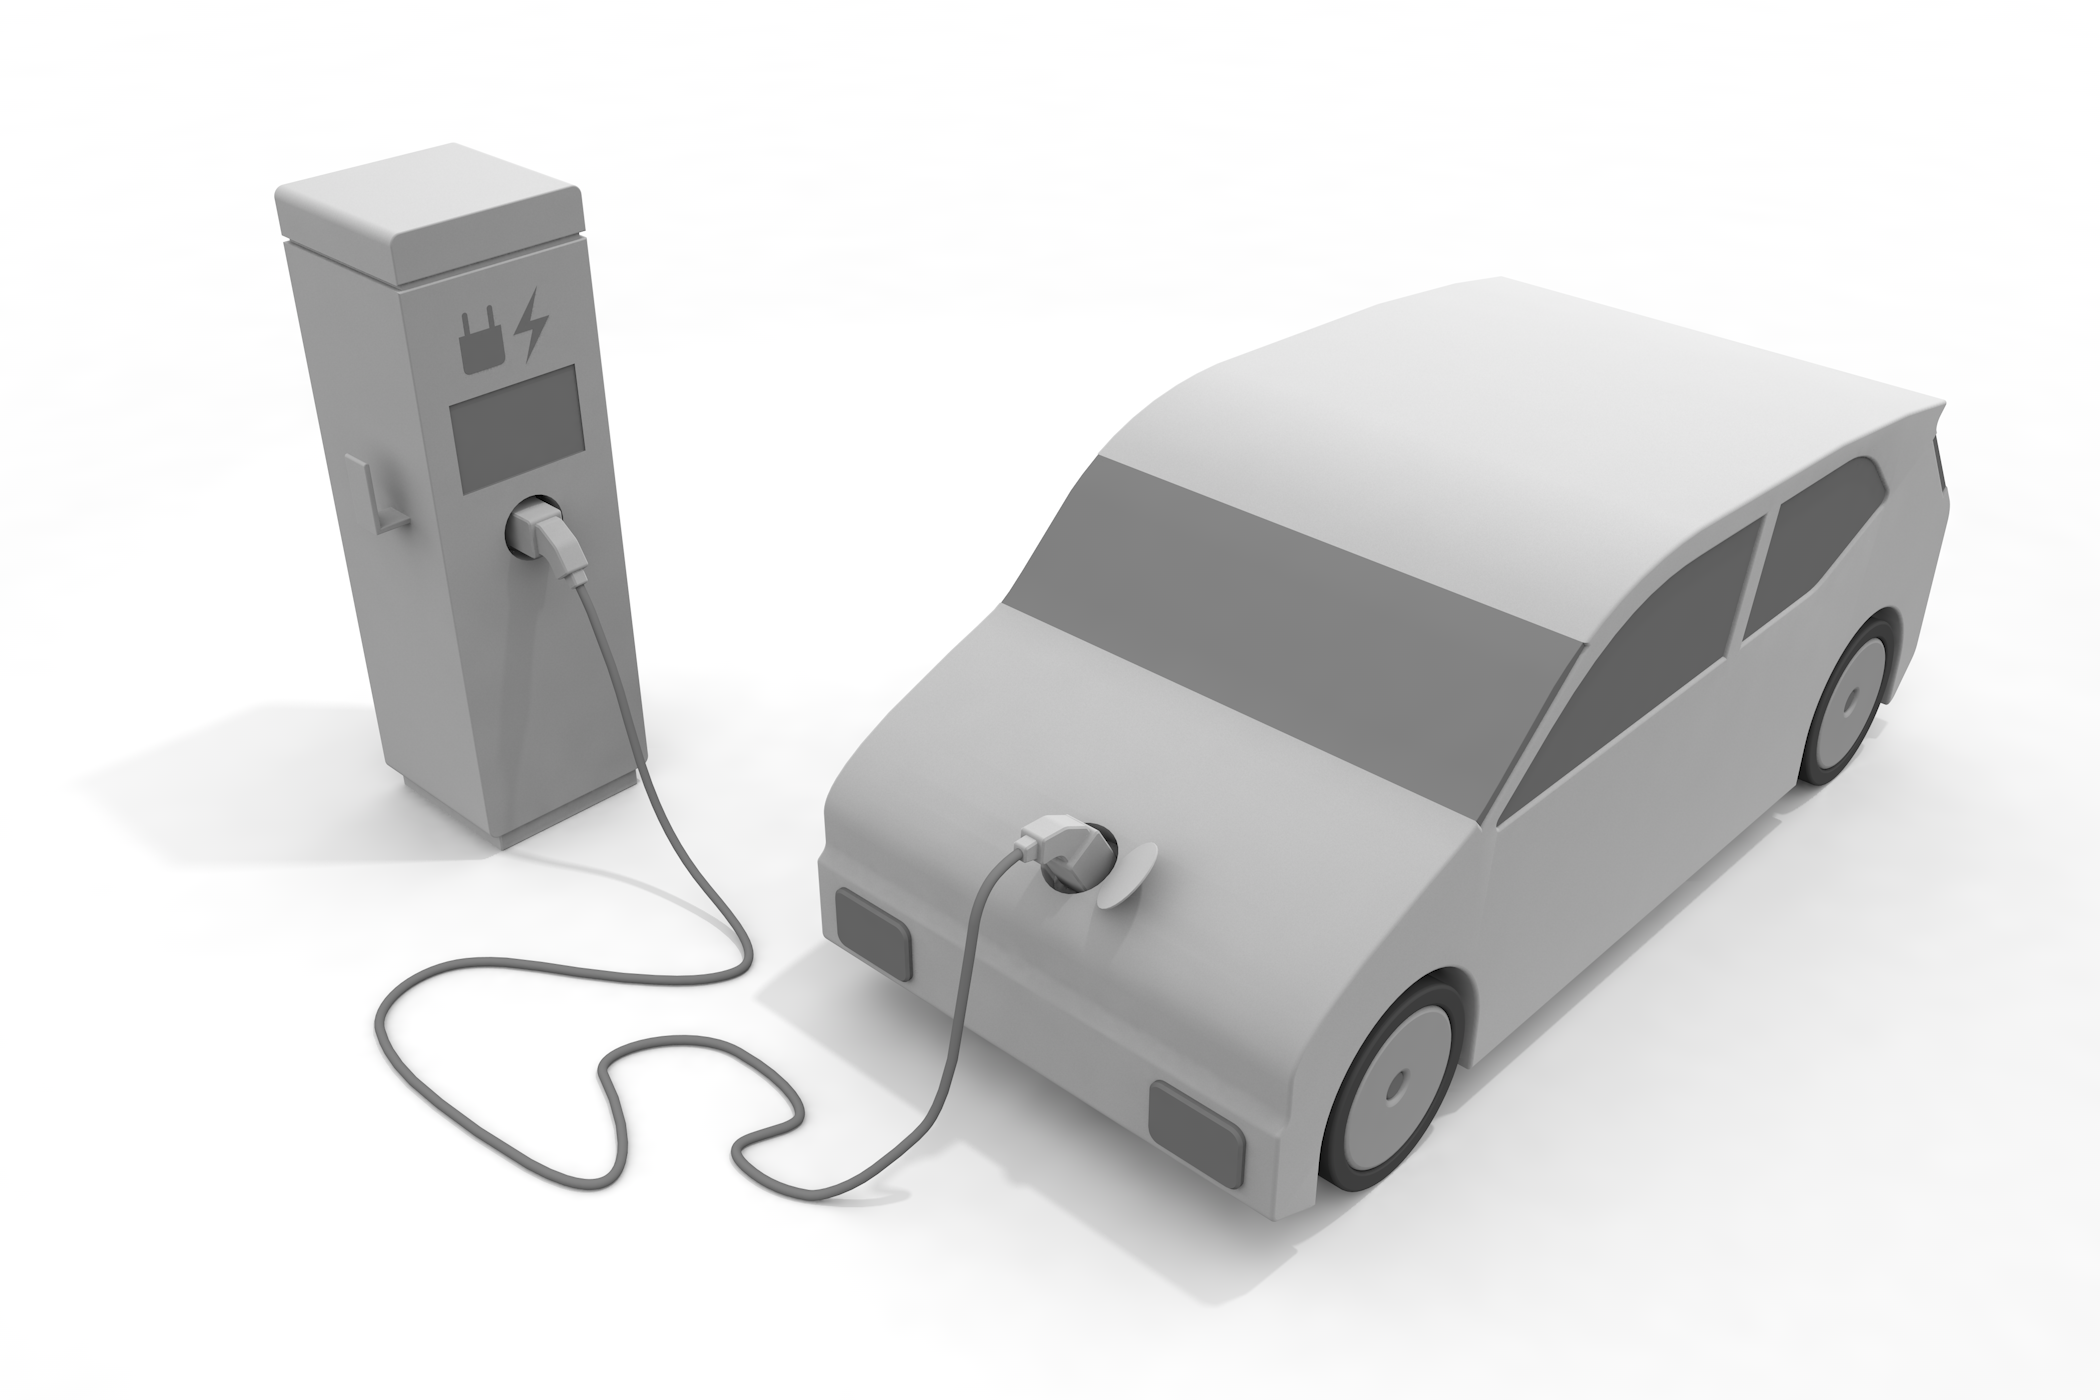 EV / Charging / Quick charging equipment / EV / QUICK --Illustration / 3D rendering / Free material / Commercial use OK